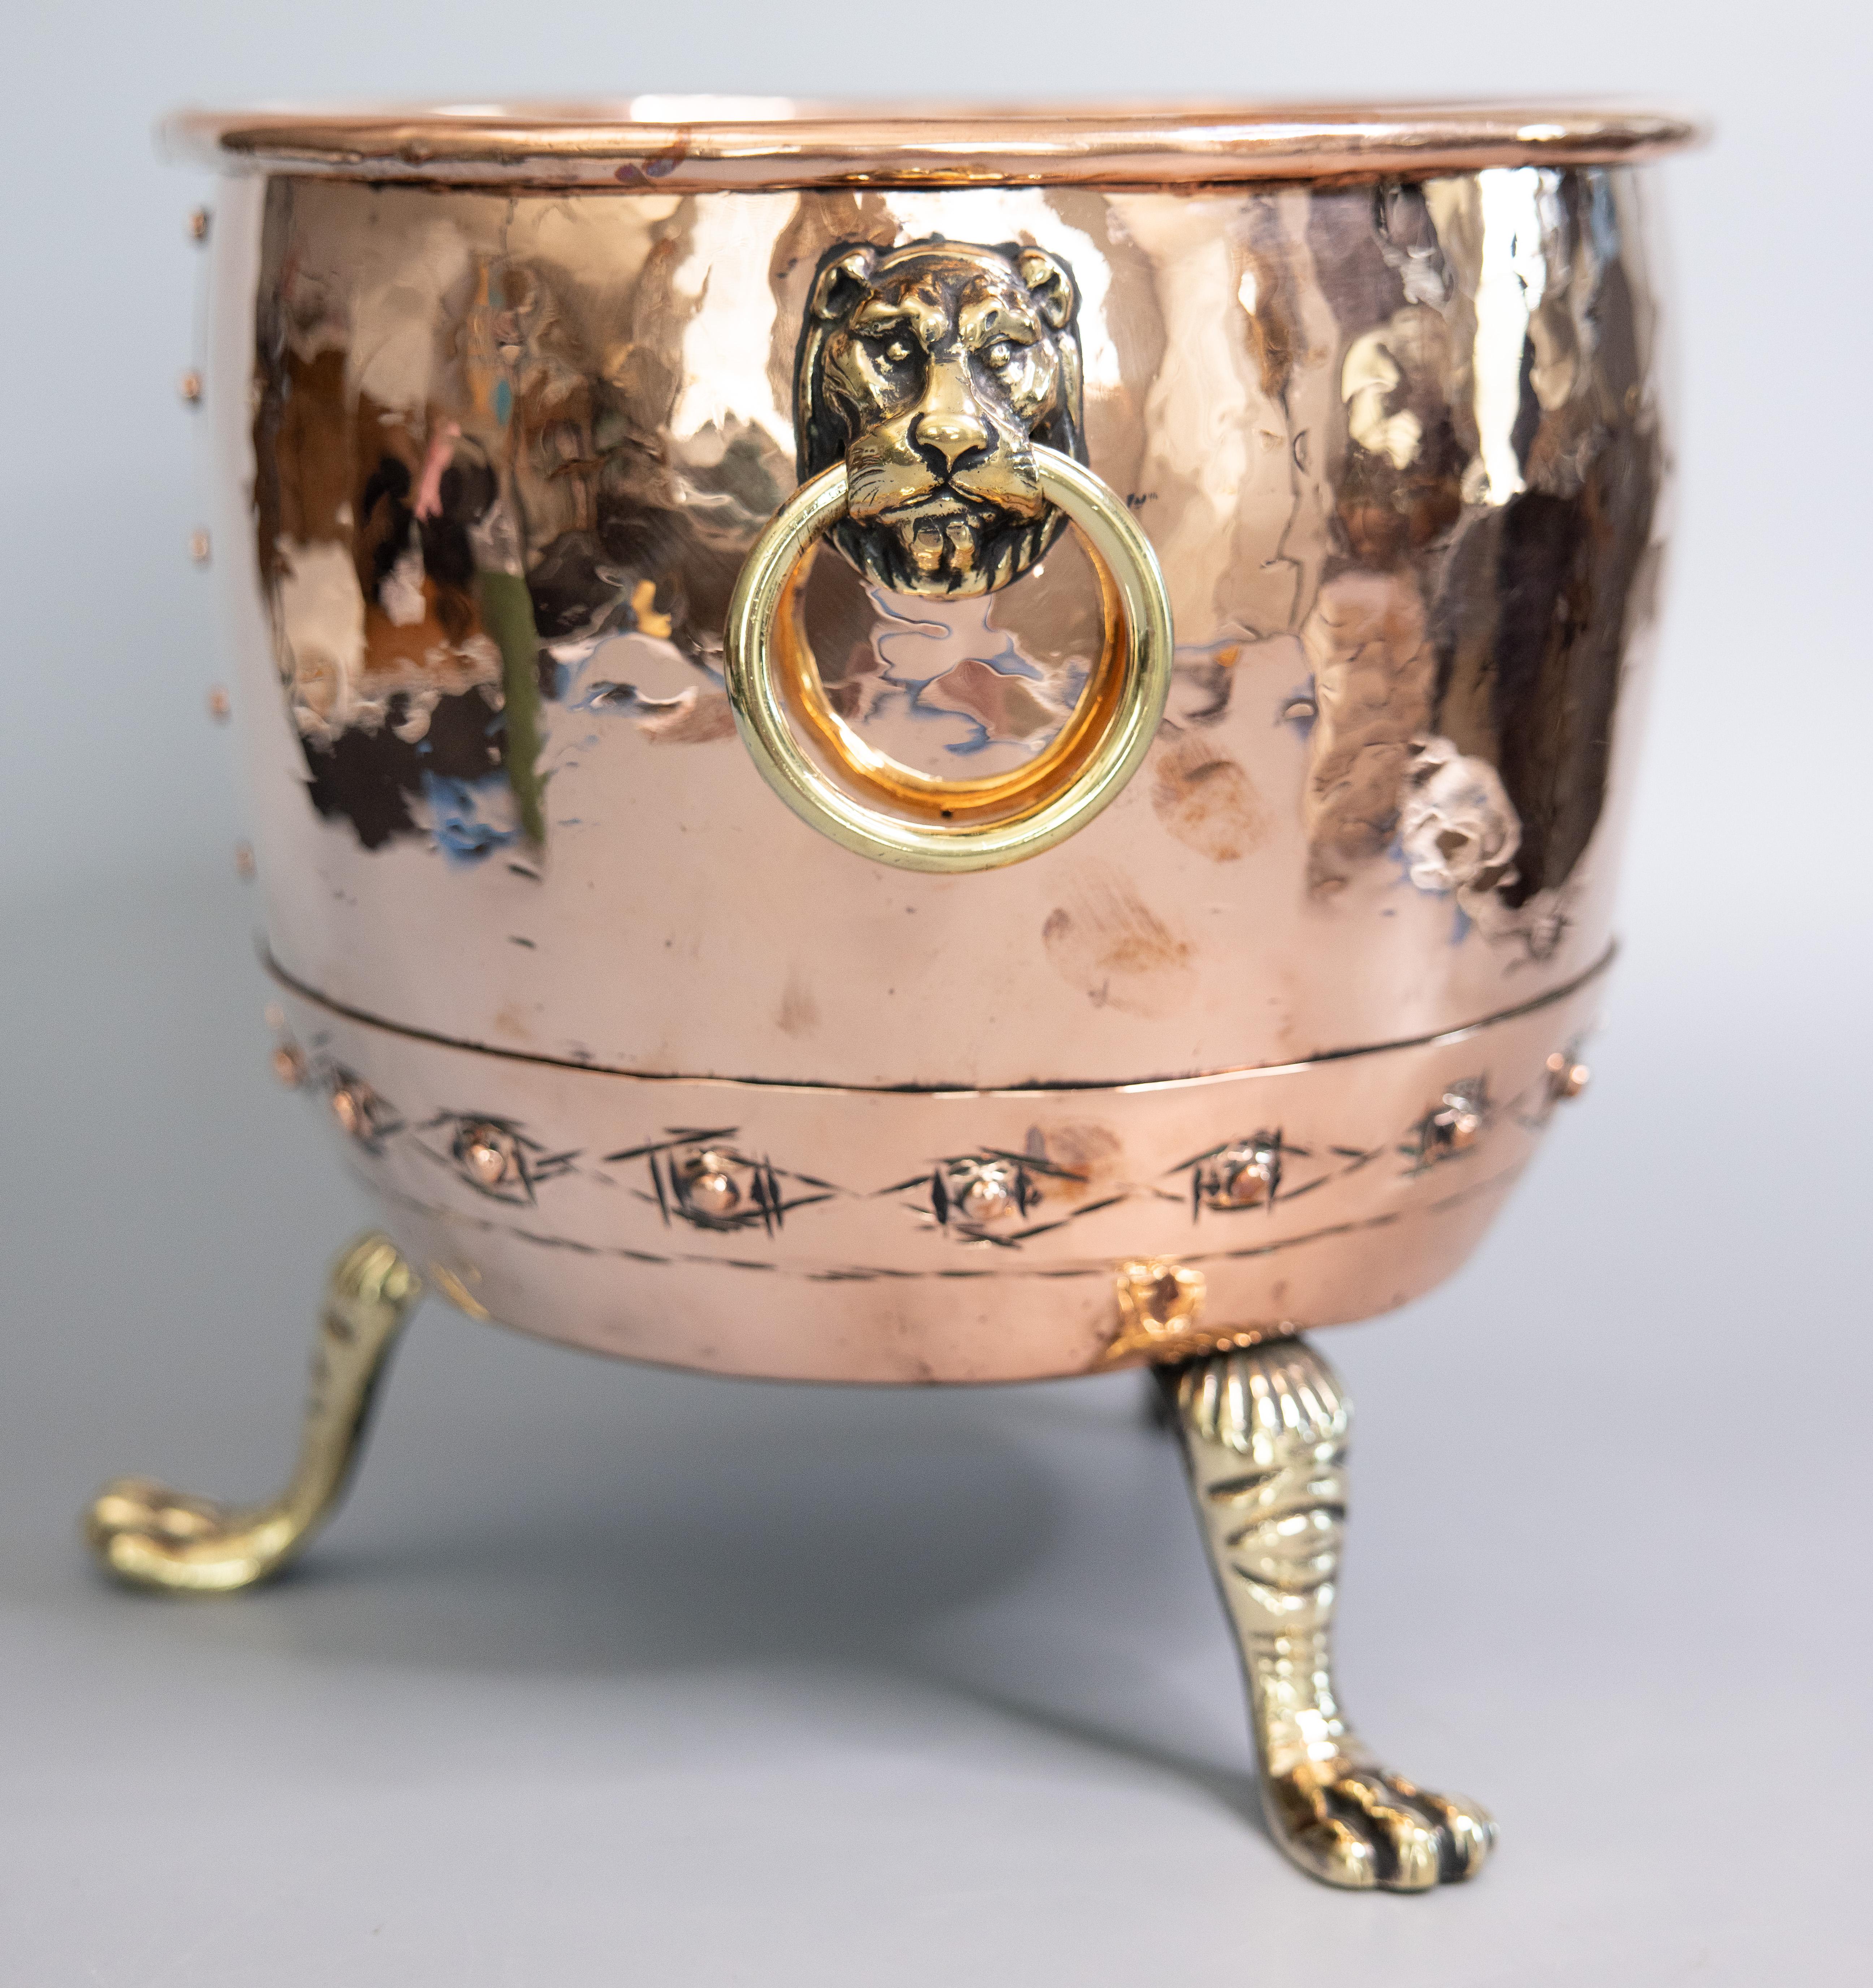 A superb large antique French hammered copper footed firewood holder / coal or log bucket / wine cooler / jardiniere, circa 1890. This fine hand crafted bucket is heavy and well made with a lovely copper patina, solid brass lion head handles, brass